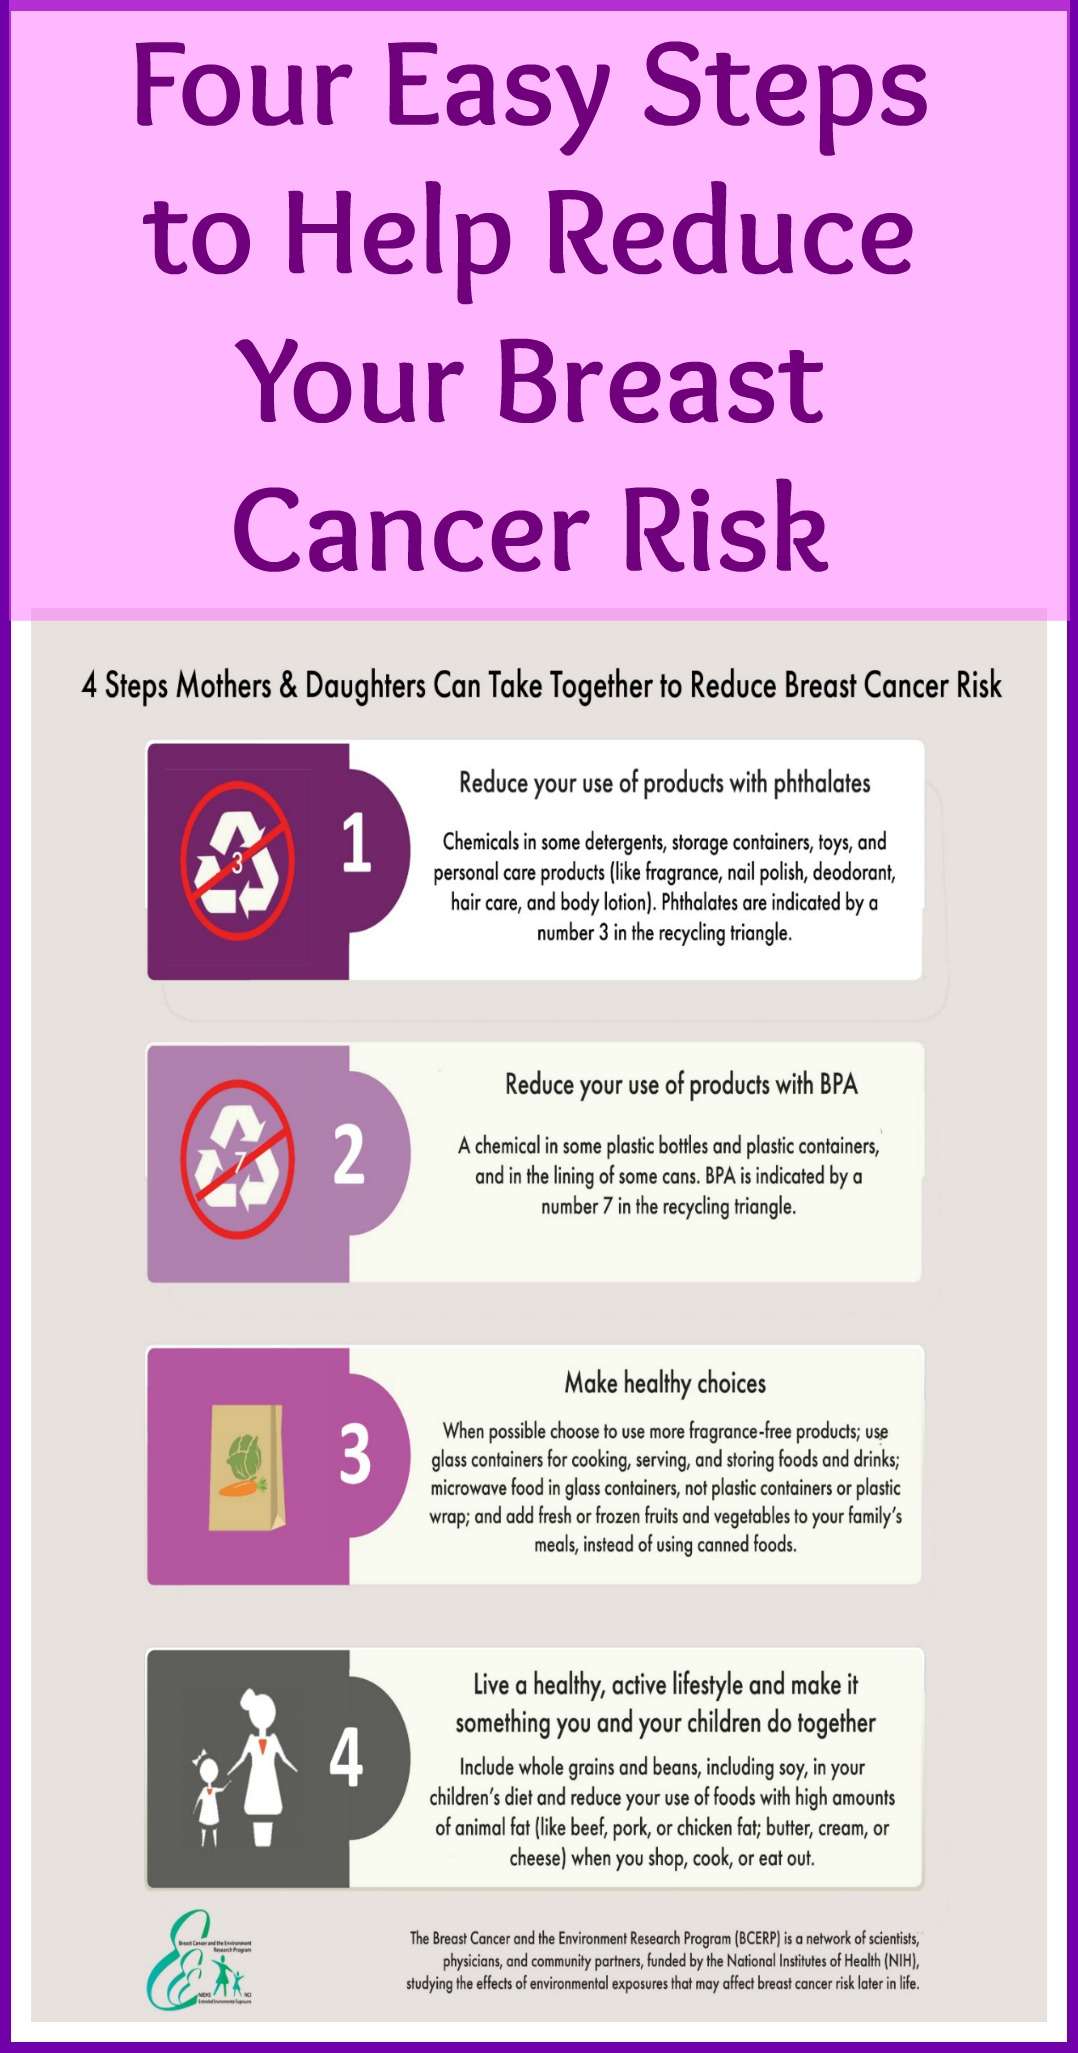 Steps Mothers and Daughters Can Take to Reduce Breast Cancer Risk